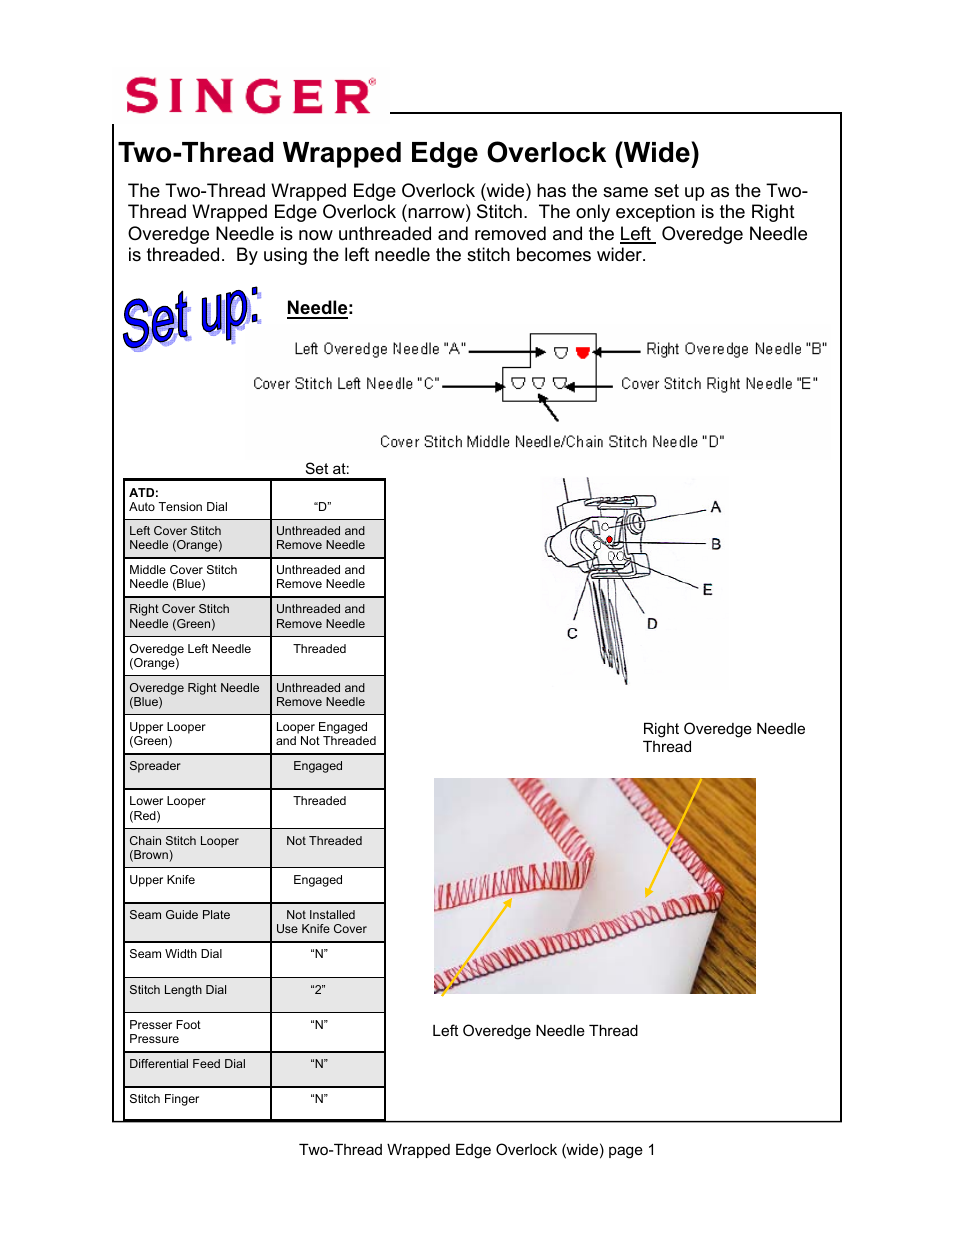 Two-thread wrapped edge overlock (wide), Needle | SINGER 14T967DC-WORKBOOK QUANTUMLOCK User Manual | Page 27 / 230